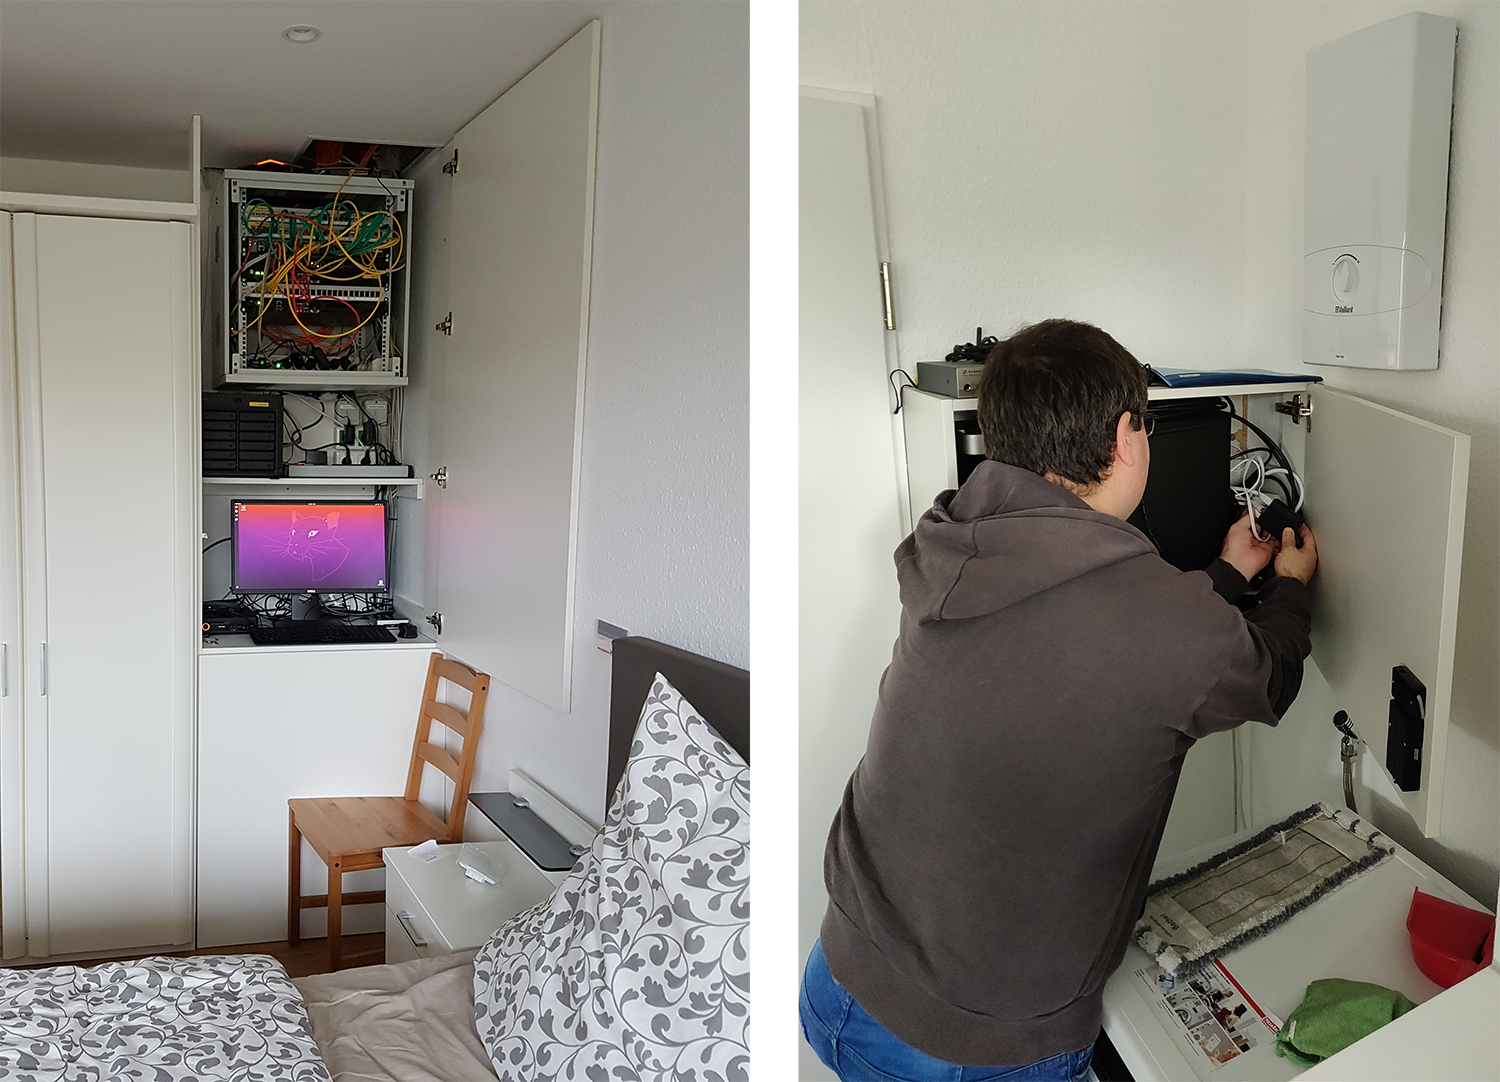 Installation of the Secure IoT Gateway at the KogniHome research flat